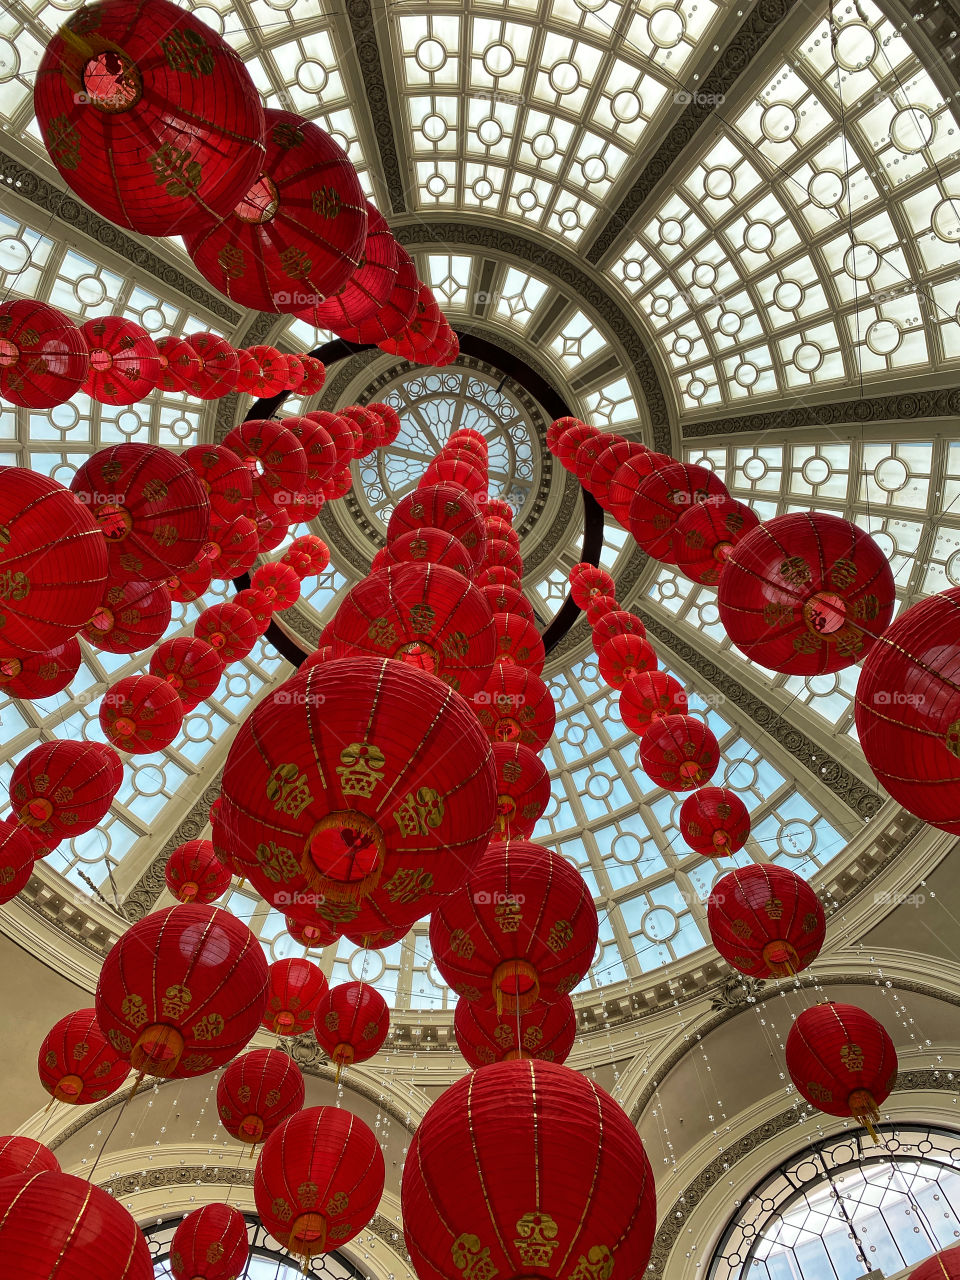 Red lantern decorations for Chinese New Year hung in a shopping mall atrium 